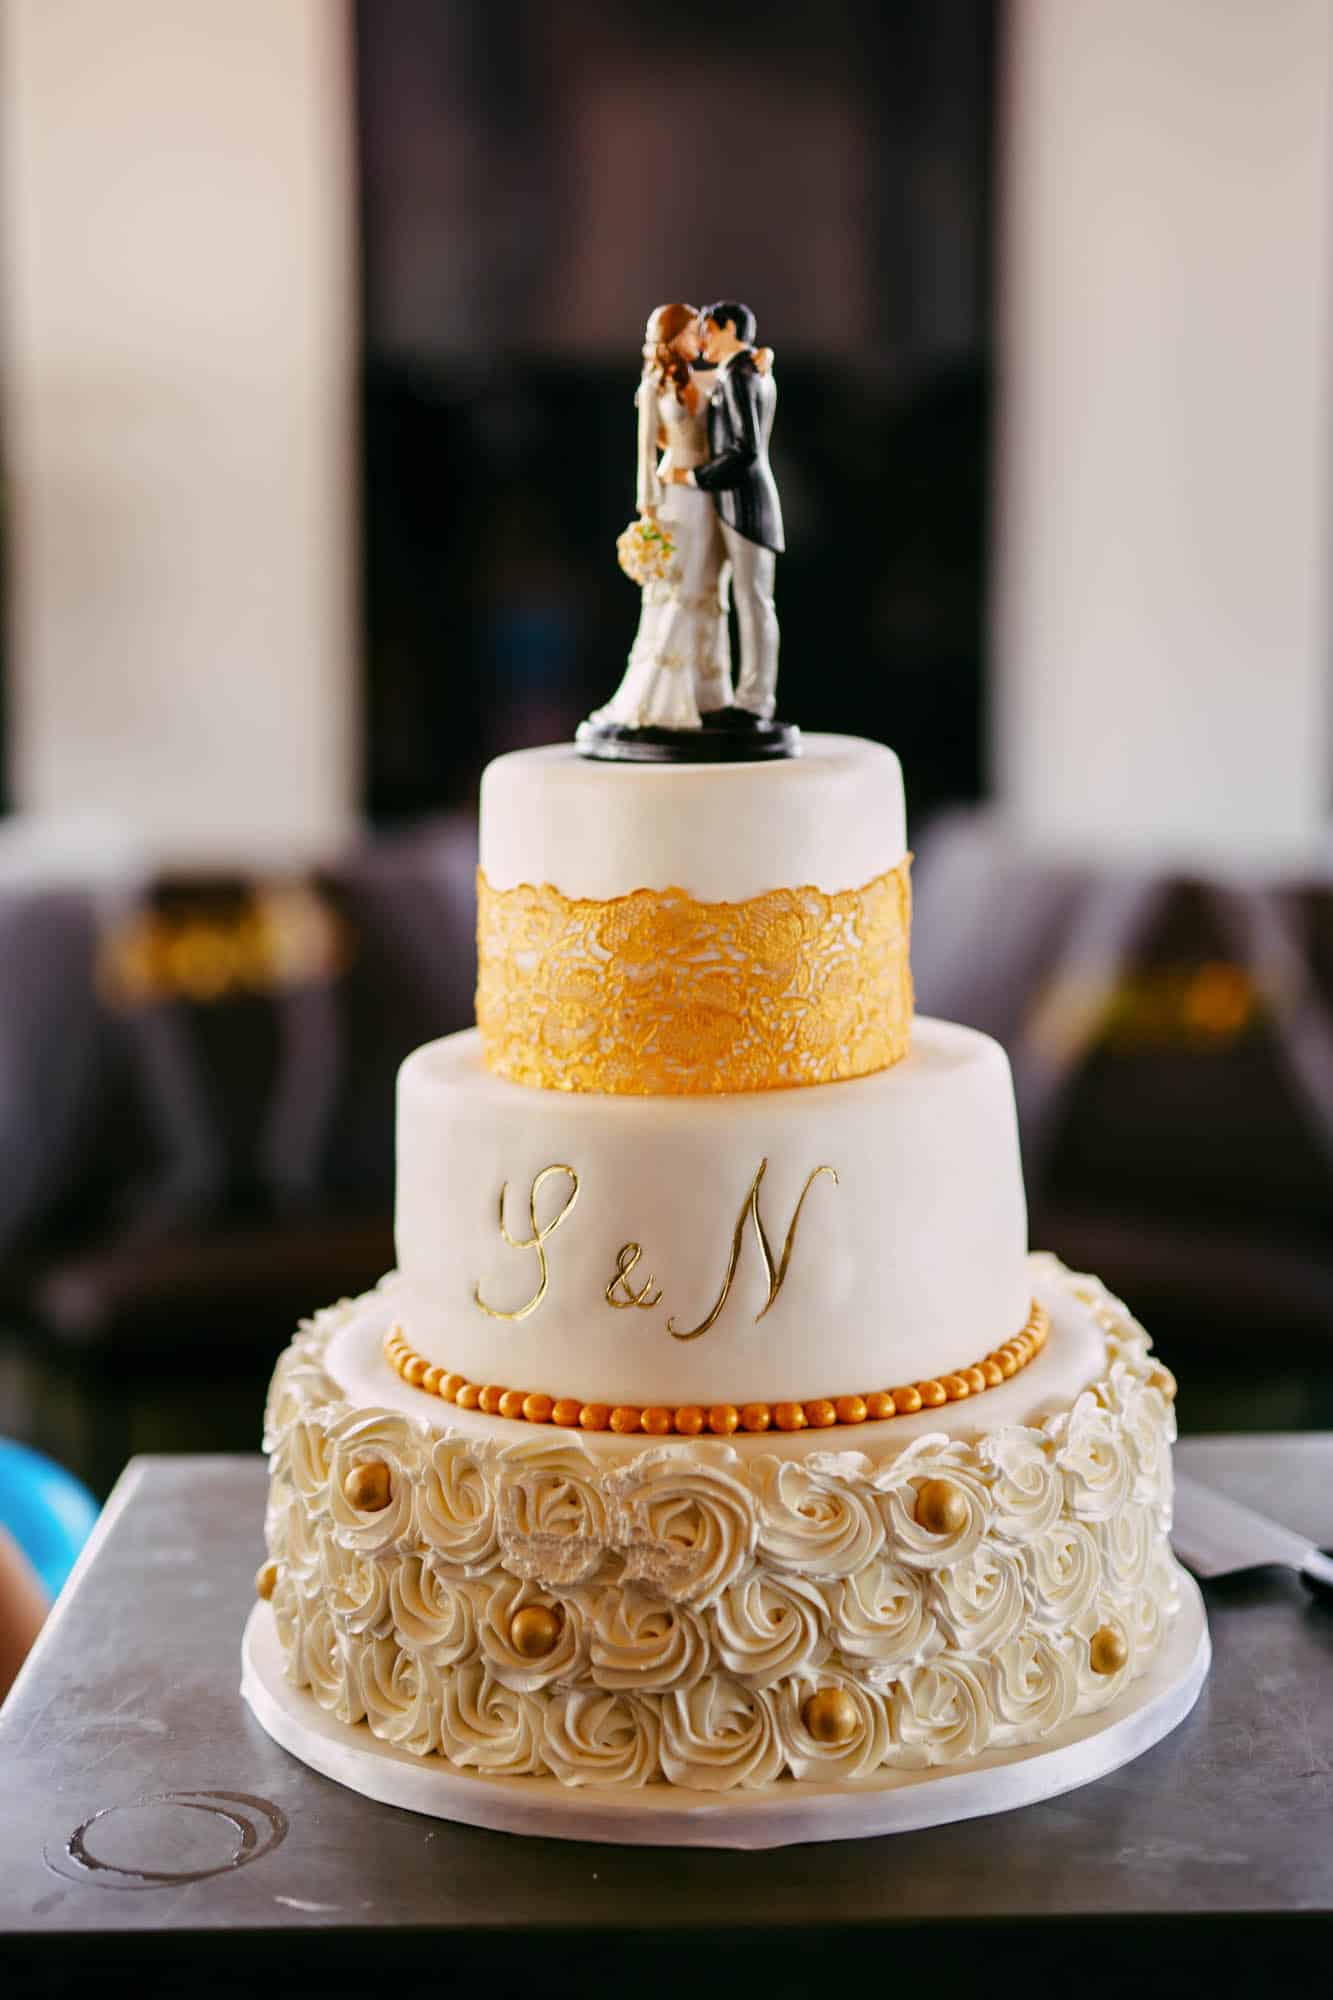 marzipan wedding cake with initials